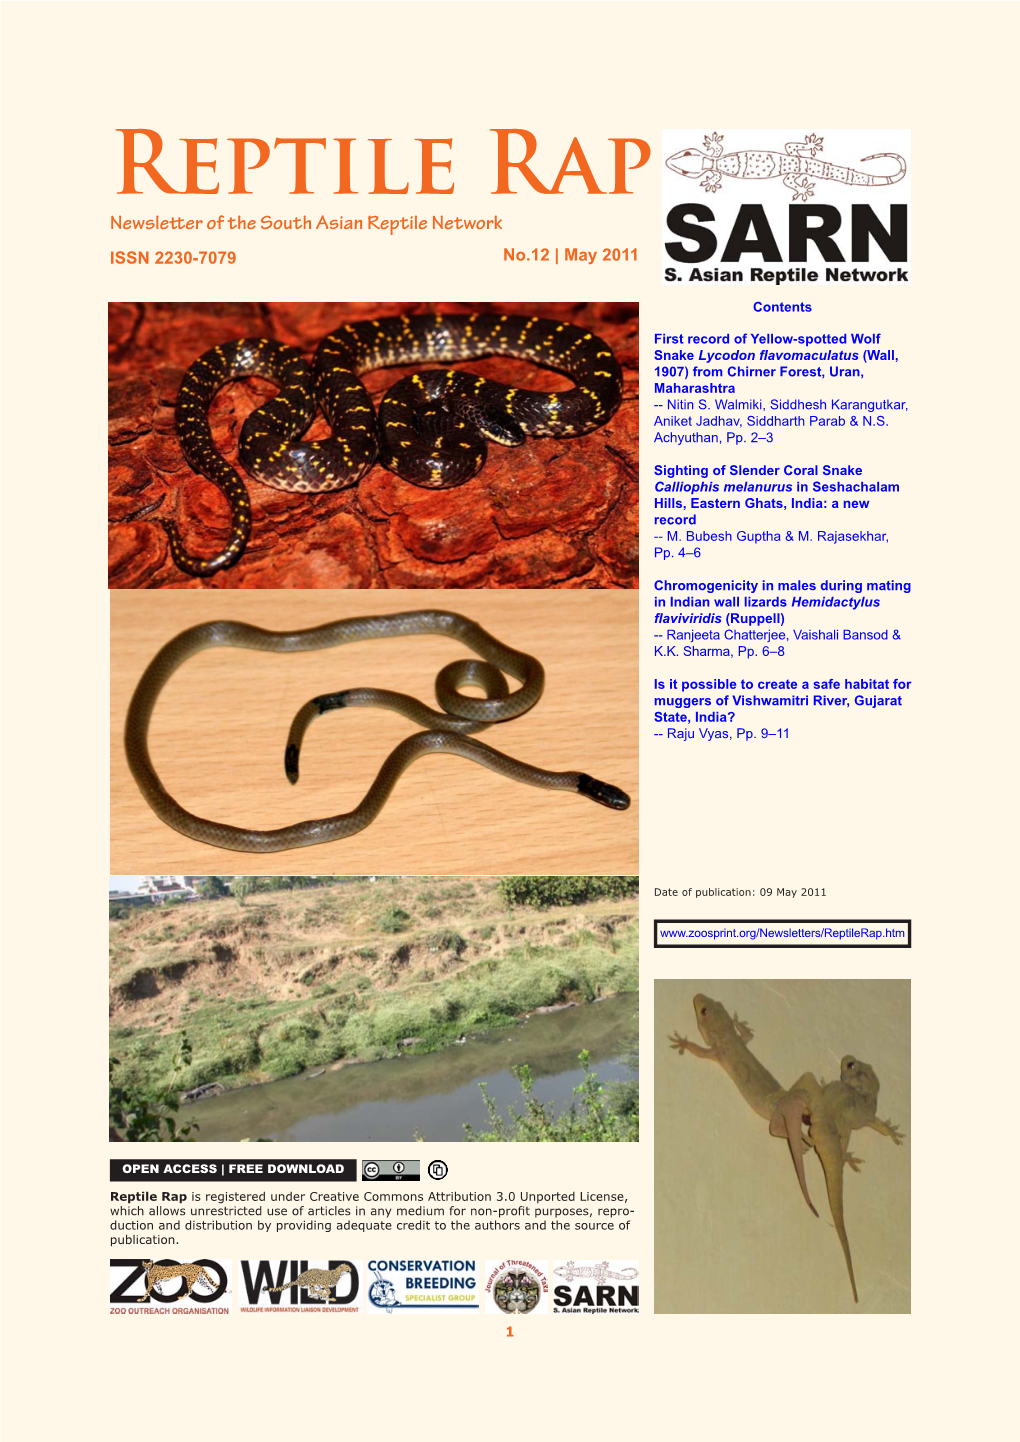 Reptile Rap Newsletter of the South Asian Reptile Network ISSN 2230-7079 No.12 | May 2011